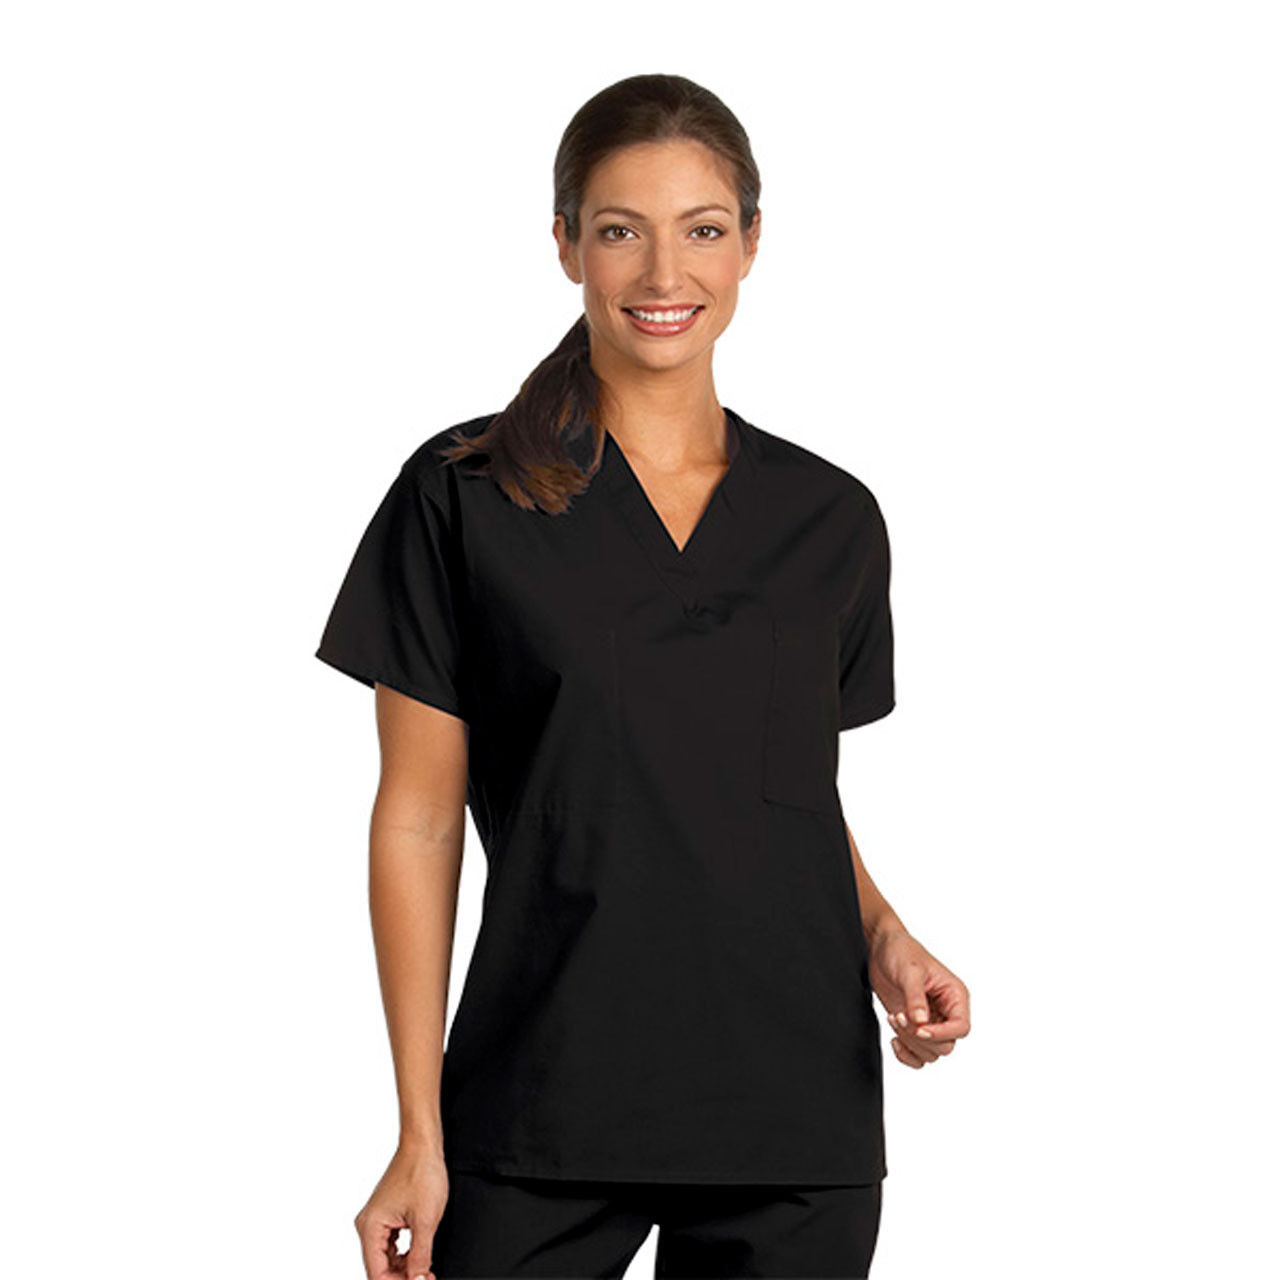 Do black medical scrubs resist fading and shrinking with frequent washes?